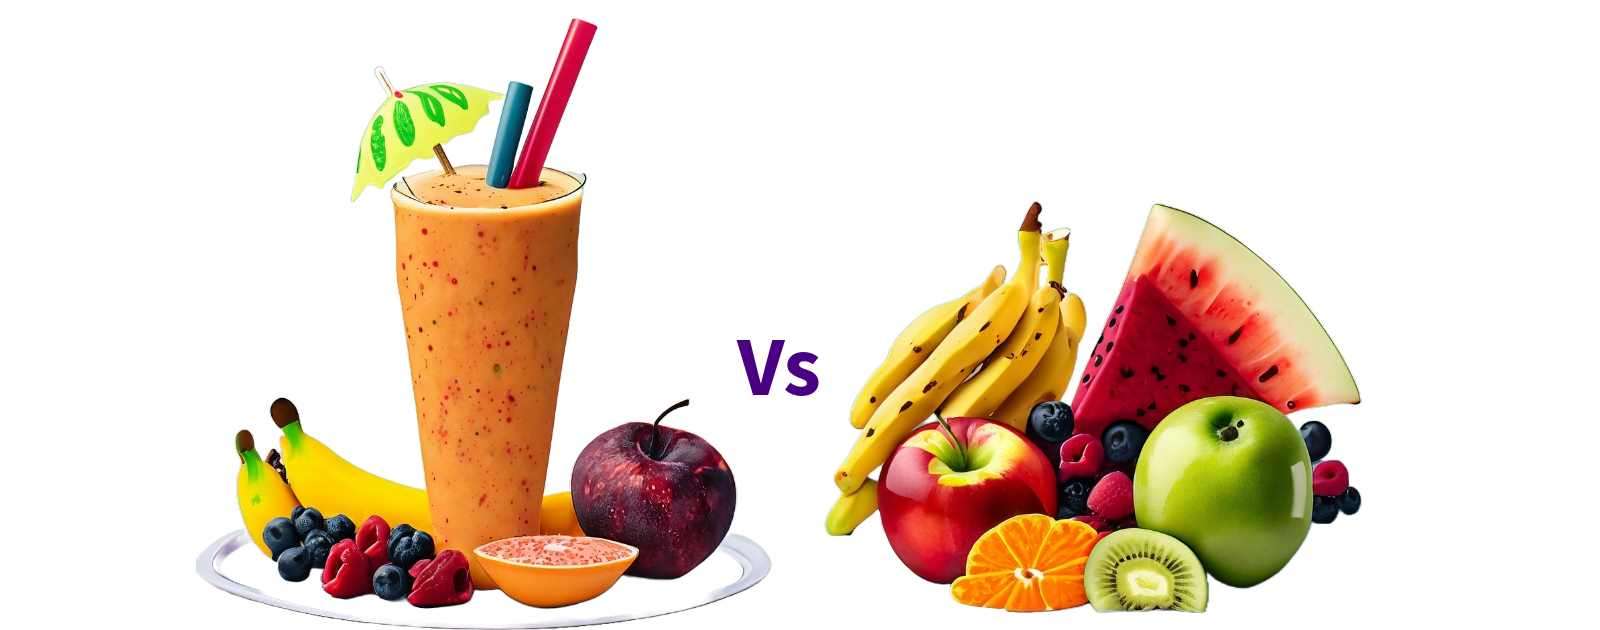 Eating Fruits vs Blending Fruits: Which One Is Healthy & Better